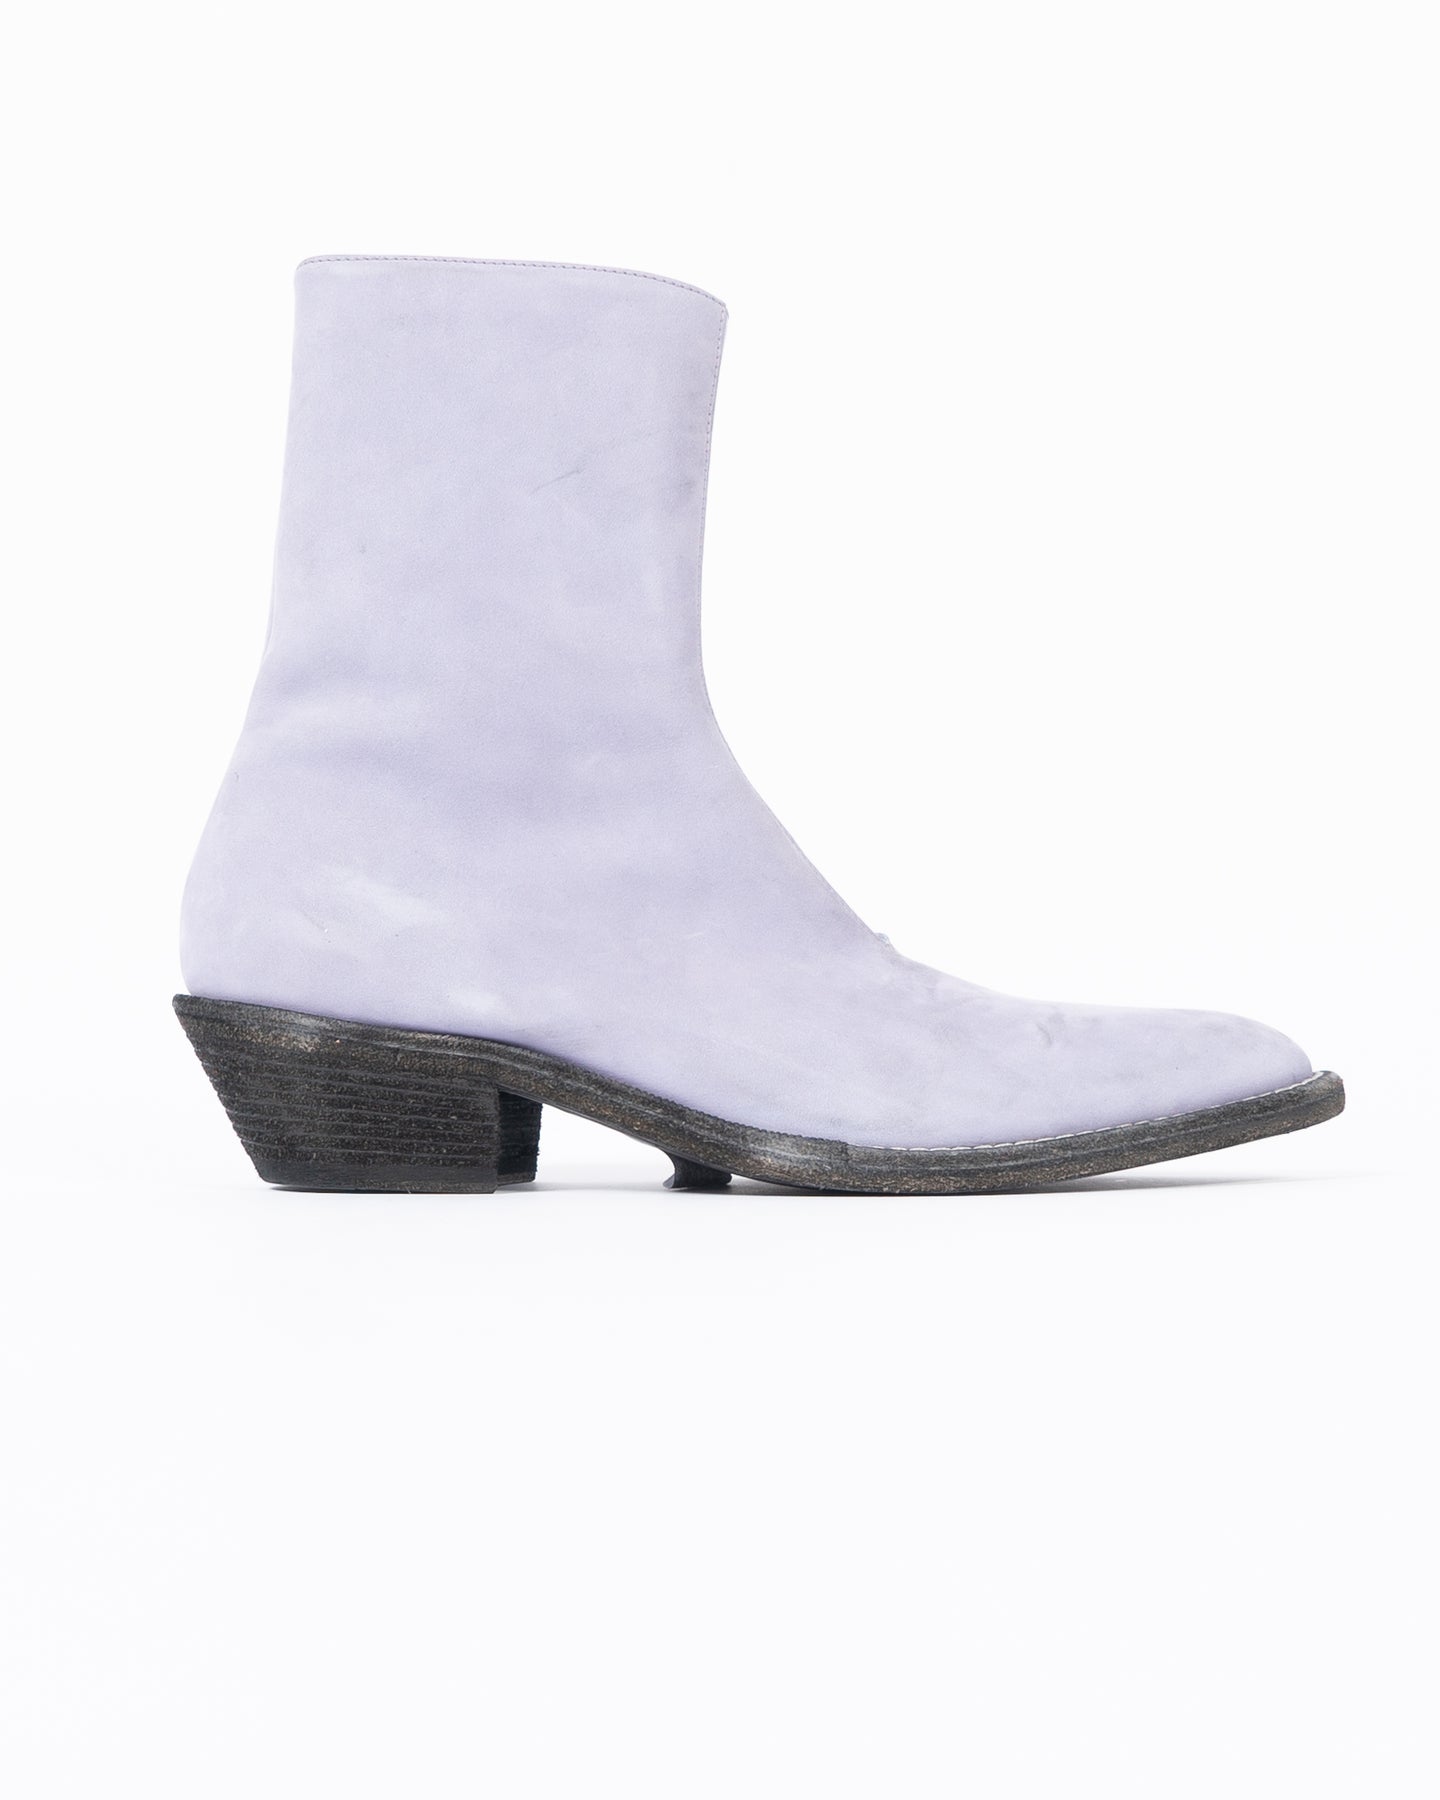 FW19 Lilac Suede Leather Western Boots